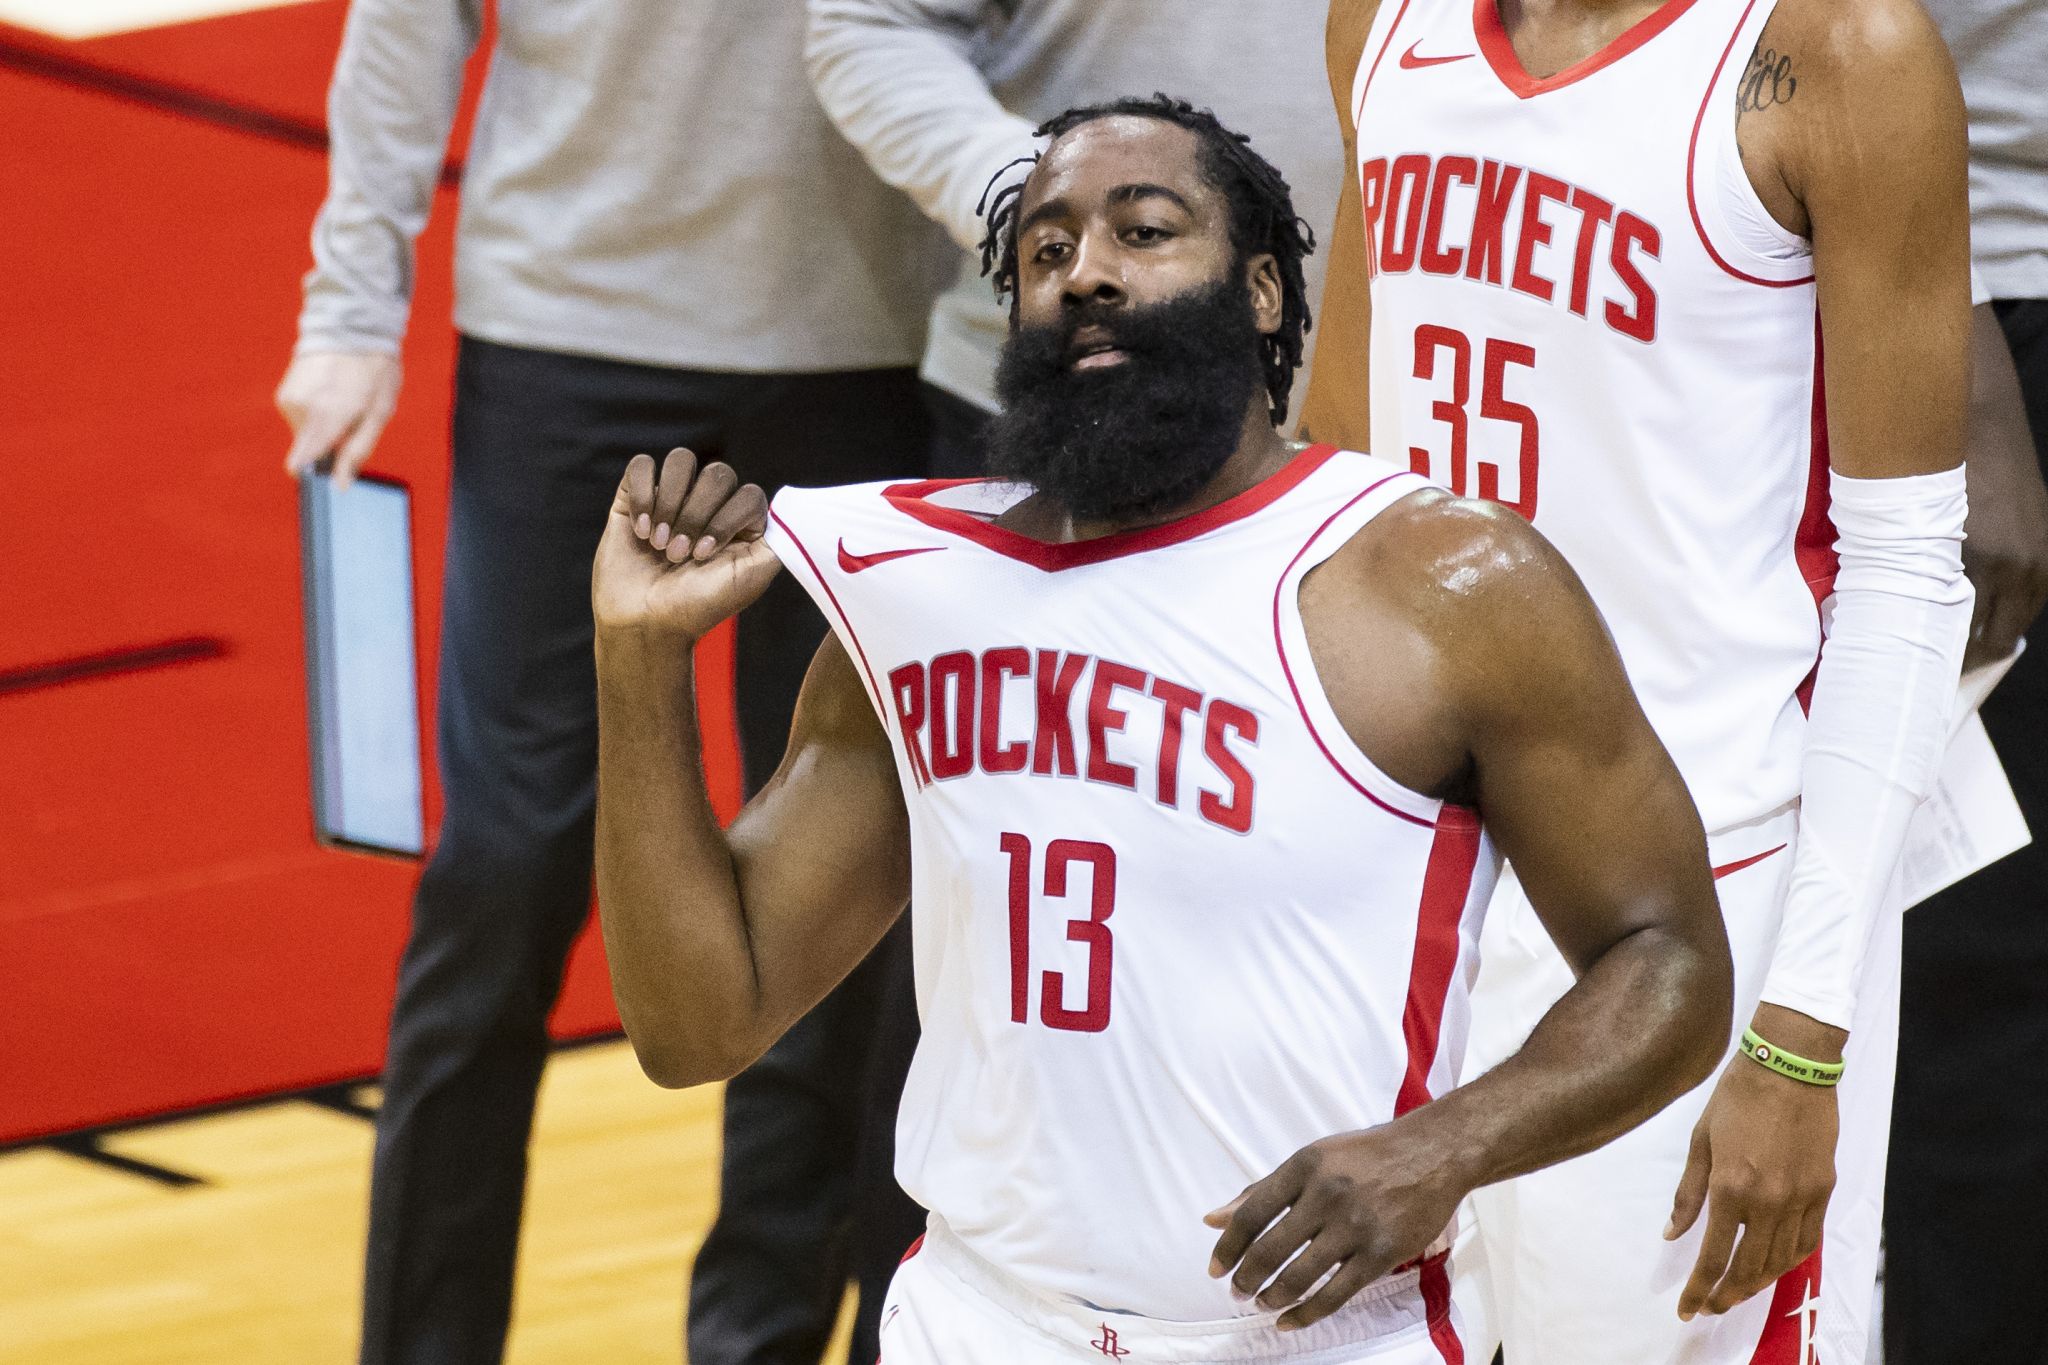 Report: Rockets trade James Harden to Nets in blockbuster deal - Chron